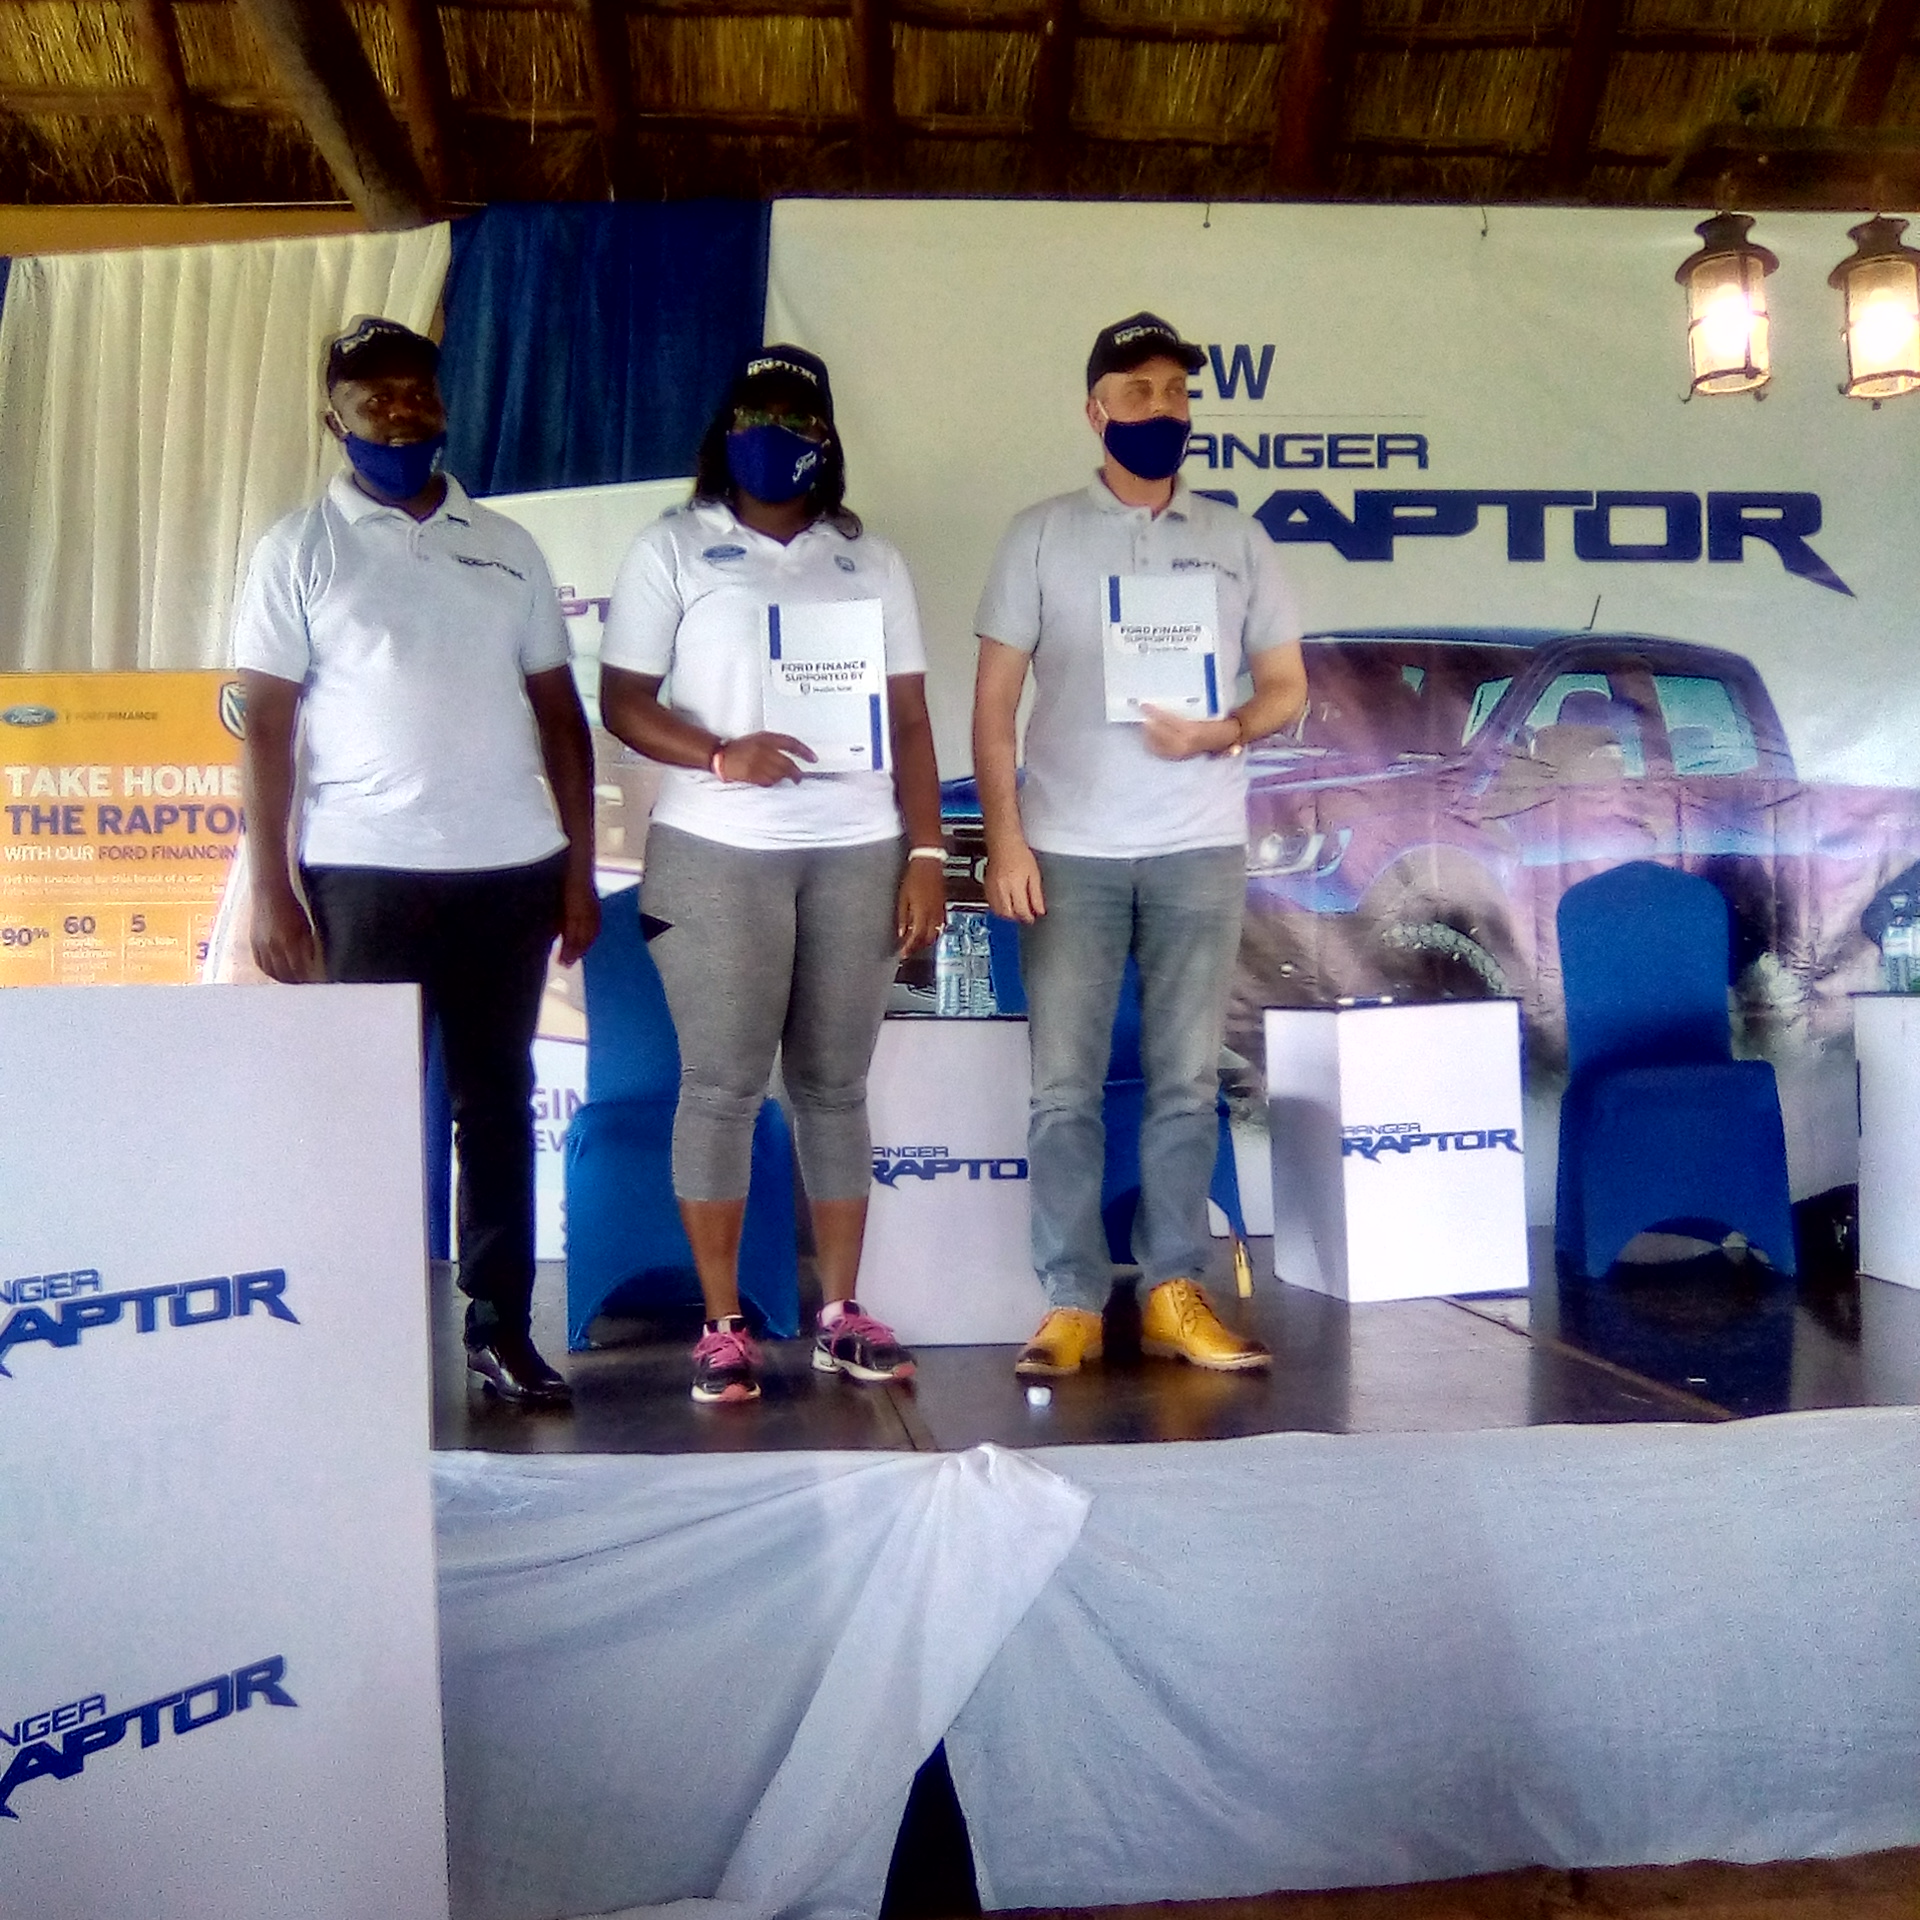 Stanbic Bank has offered Ugandans a chance to drive monster Pick-up trucks